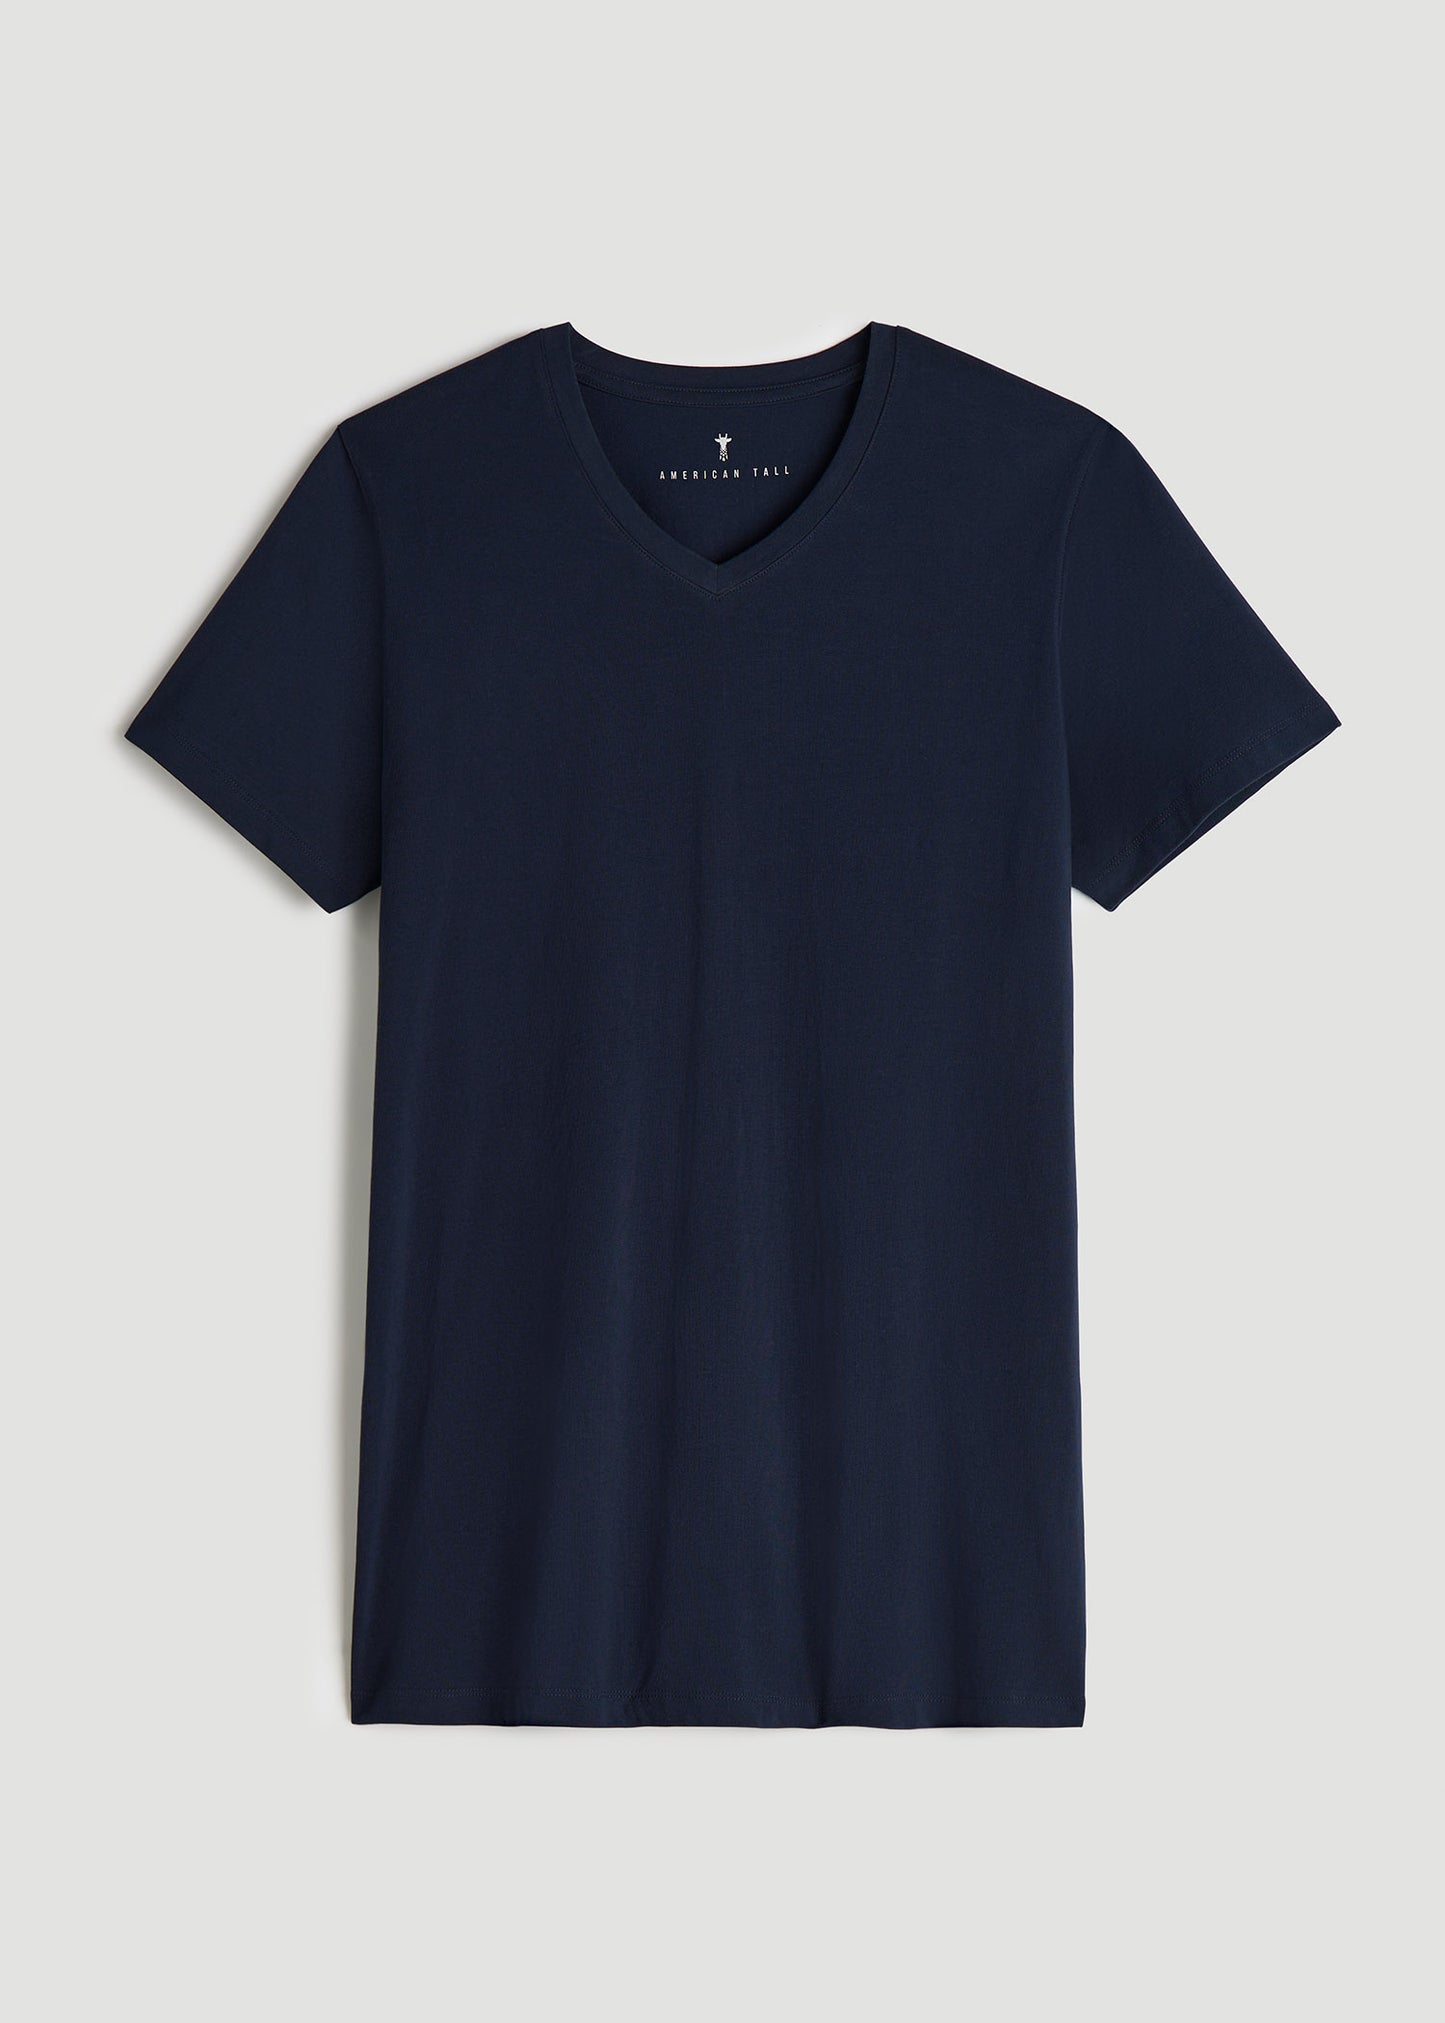 Stretch Cotton MODERN-FIT V-Neck T-Shirt for Tall Men in True Navy